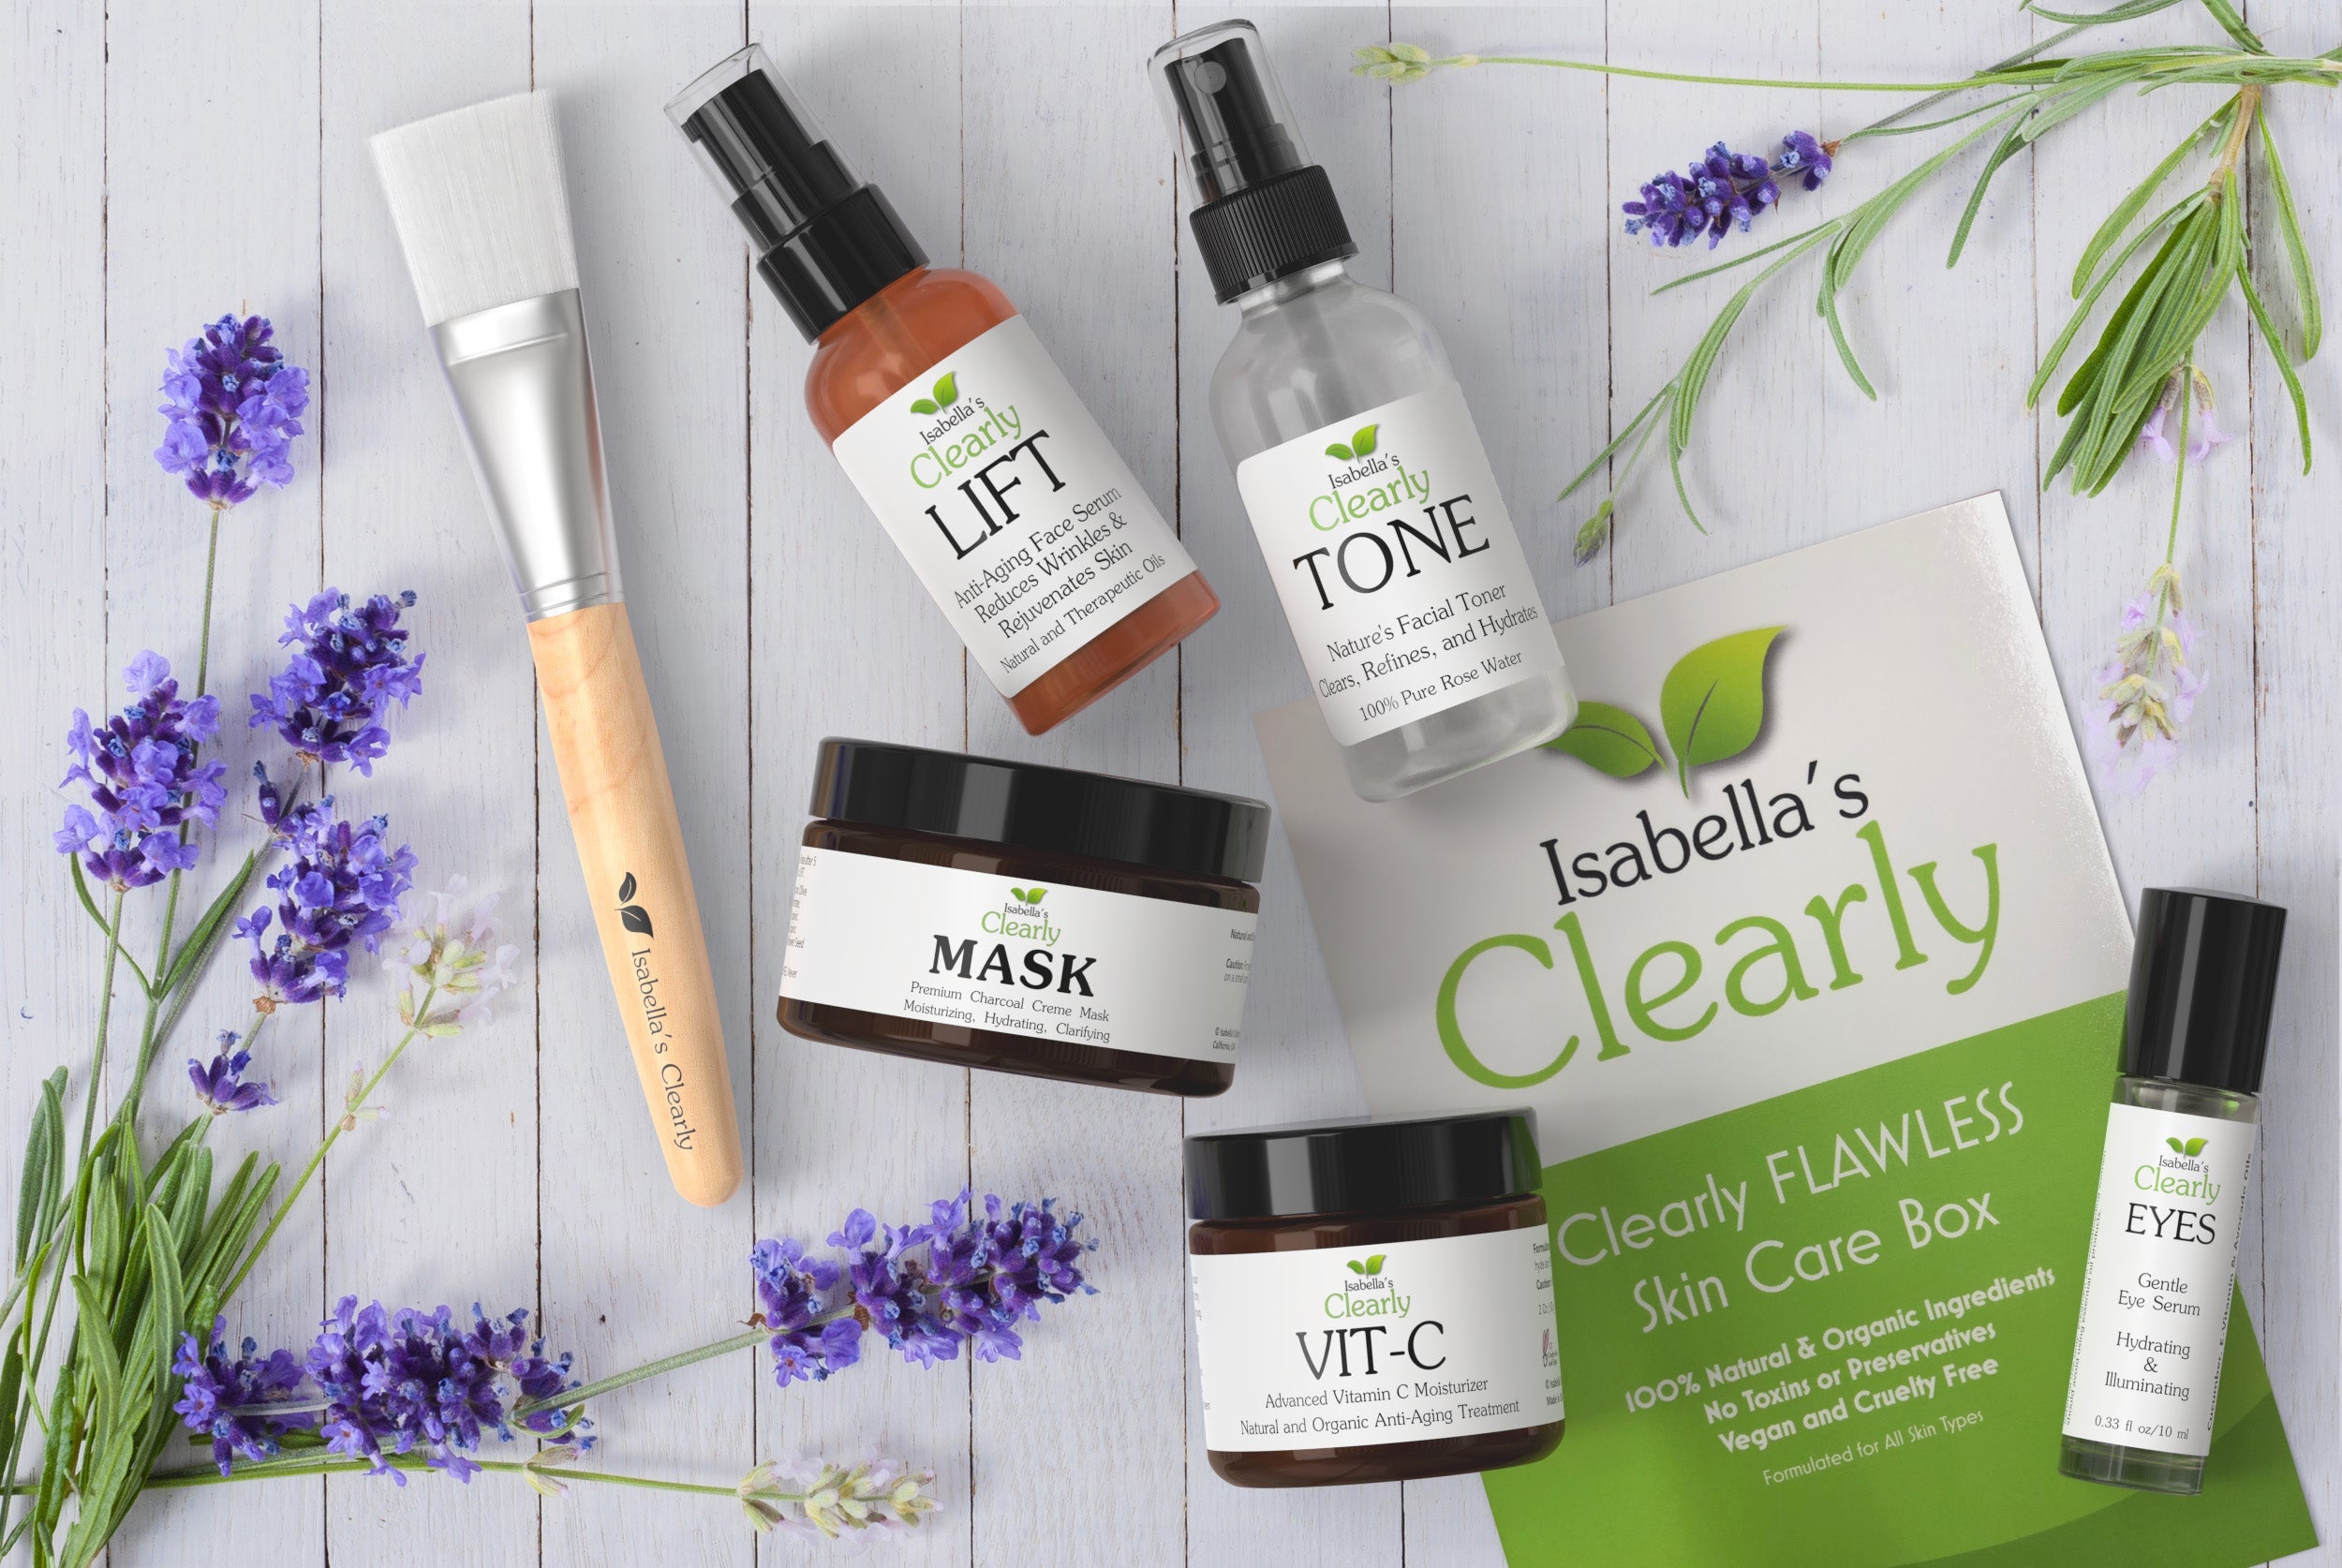 Clearly Flawless, Clean Skin Care For All Skin Types